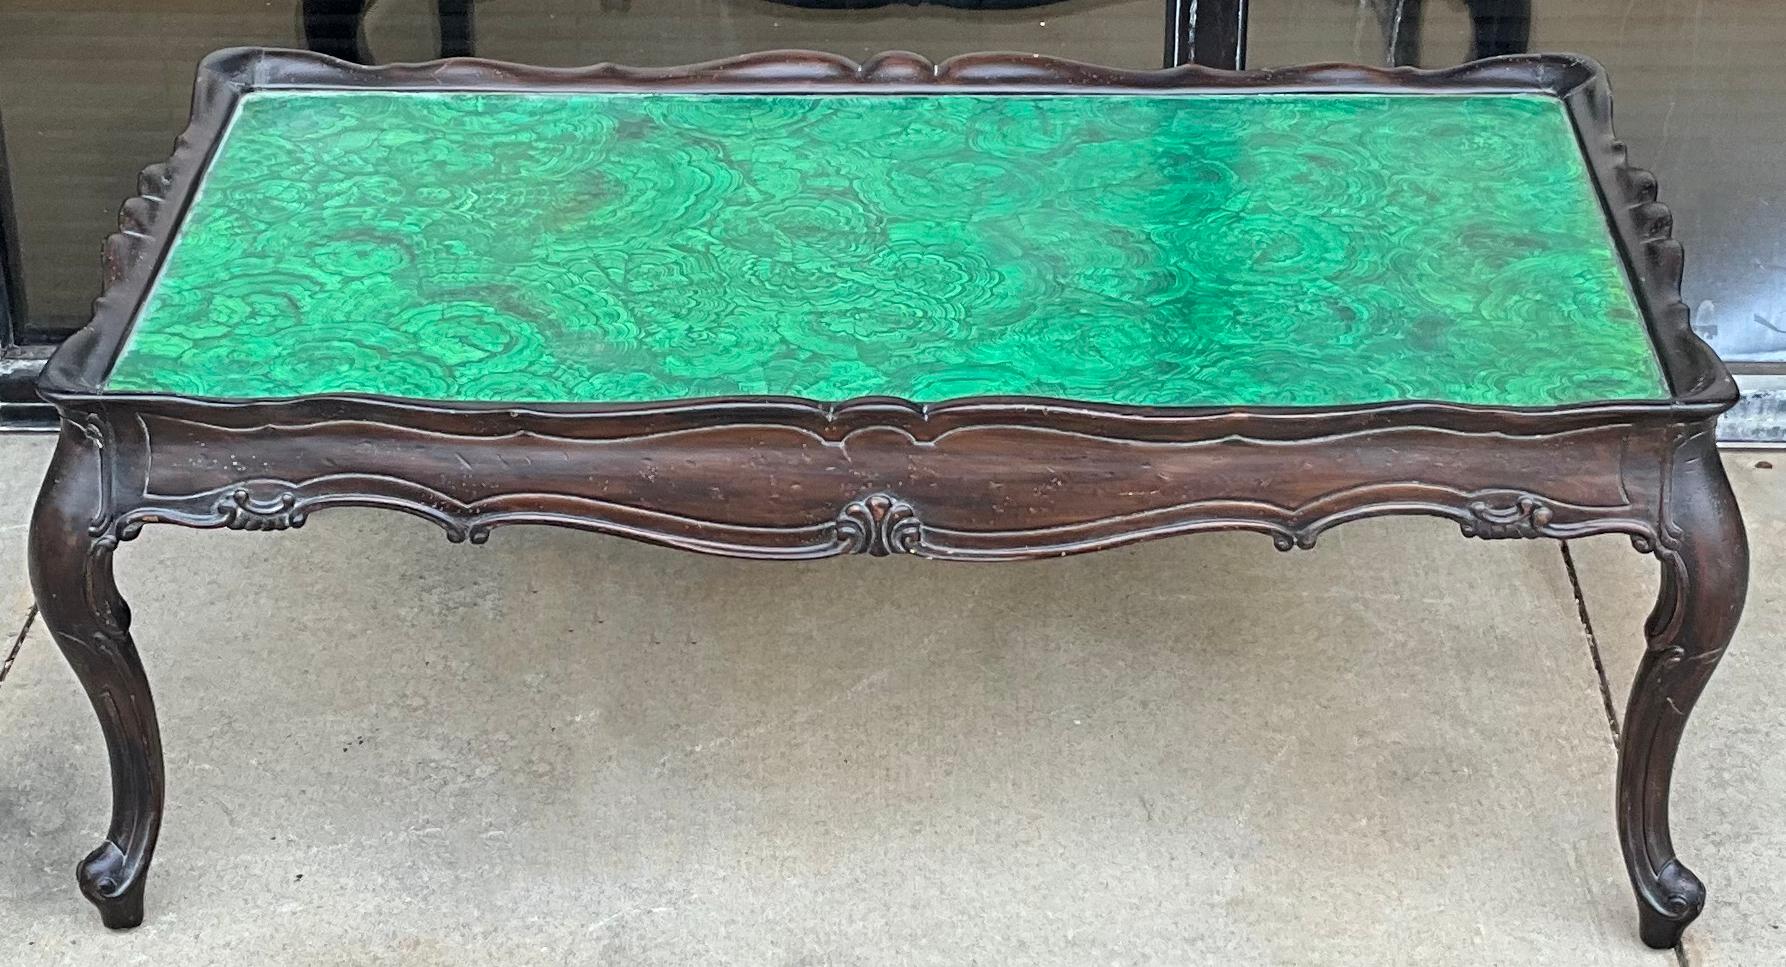 1960s Hollywood Regency Italian Rococo Style Faux Malachite Coffee Table  For Sale 1